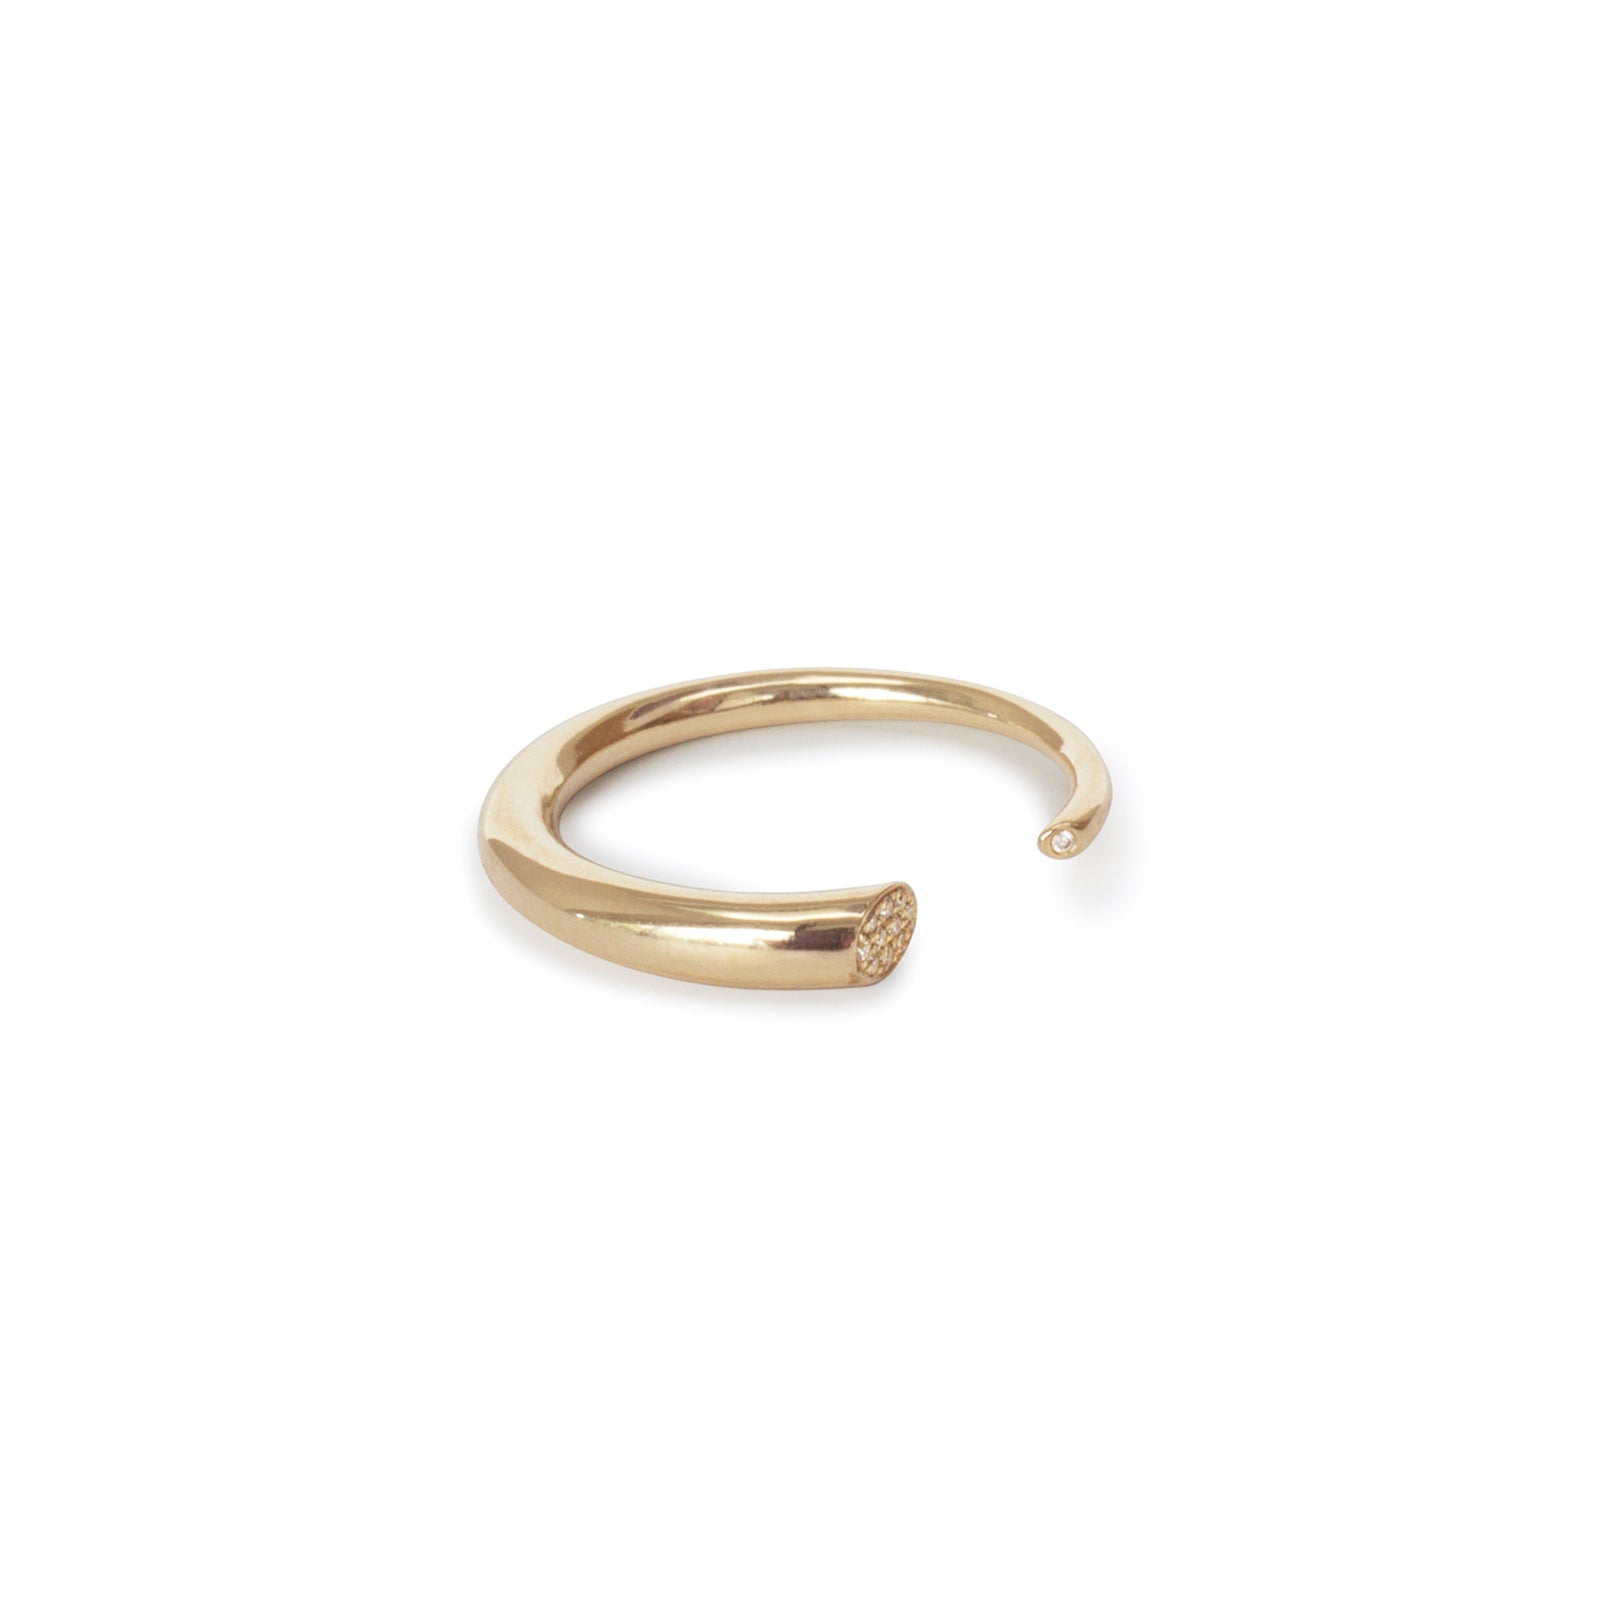 14k yellow gold w/white diamonds / tapered / 6 arpent stacking rings with diamonds